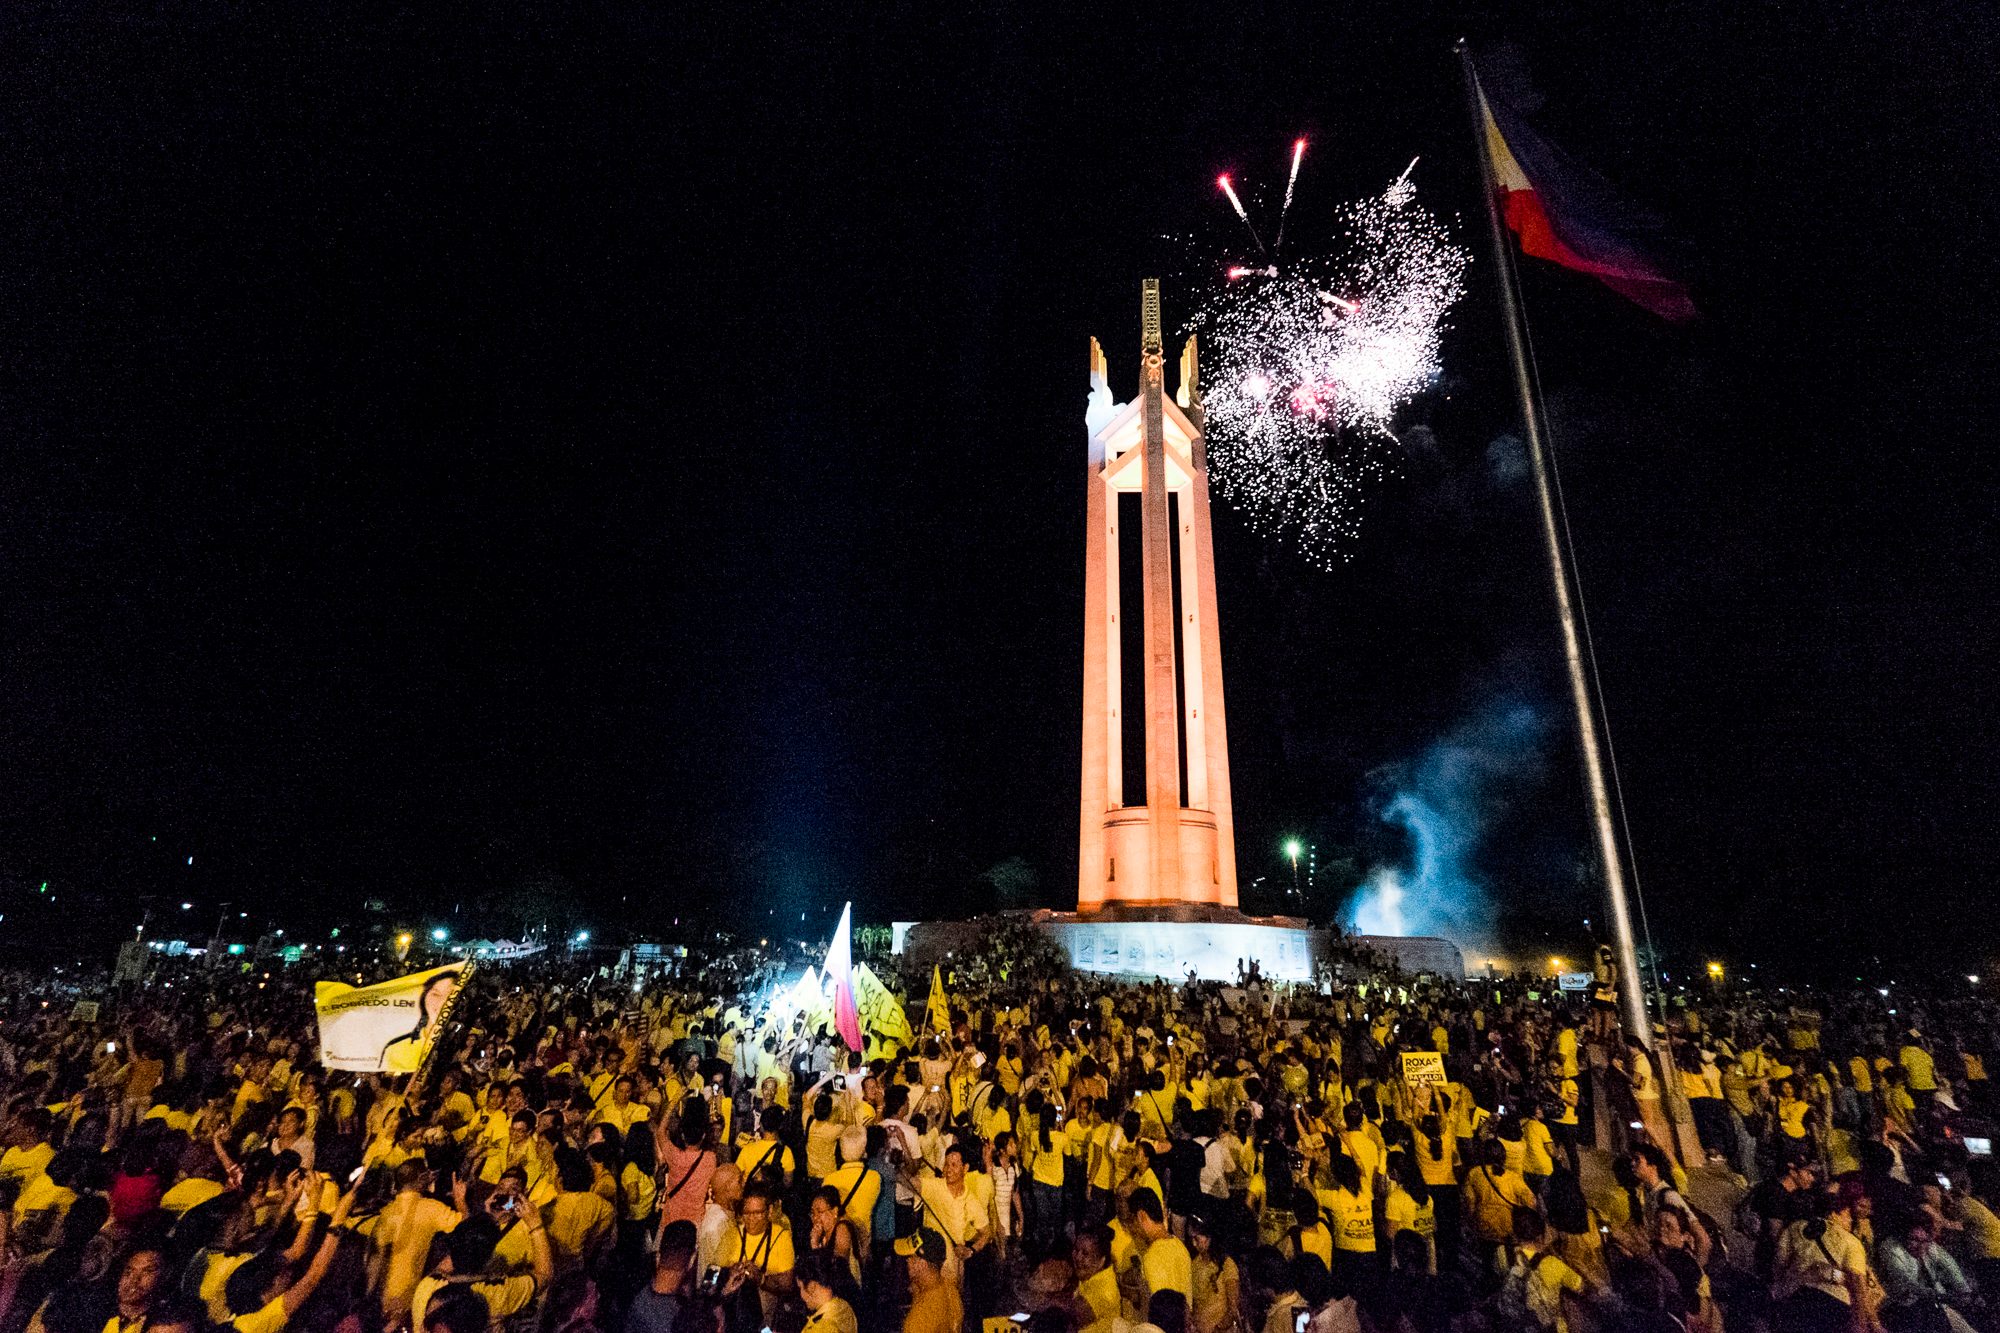 The Liberal Party ended its miting de avance with a fireworks display for the thousands of supporters that showed up at QC Circle on May 7, 2016. Photo by Pat Nabong/Rappler 